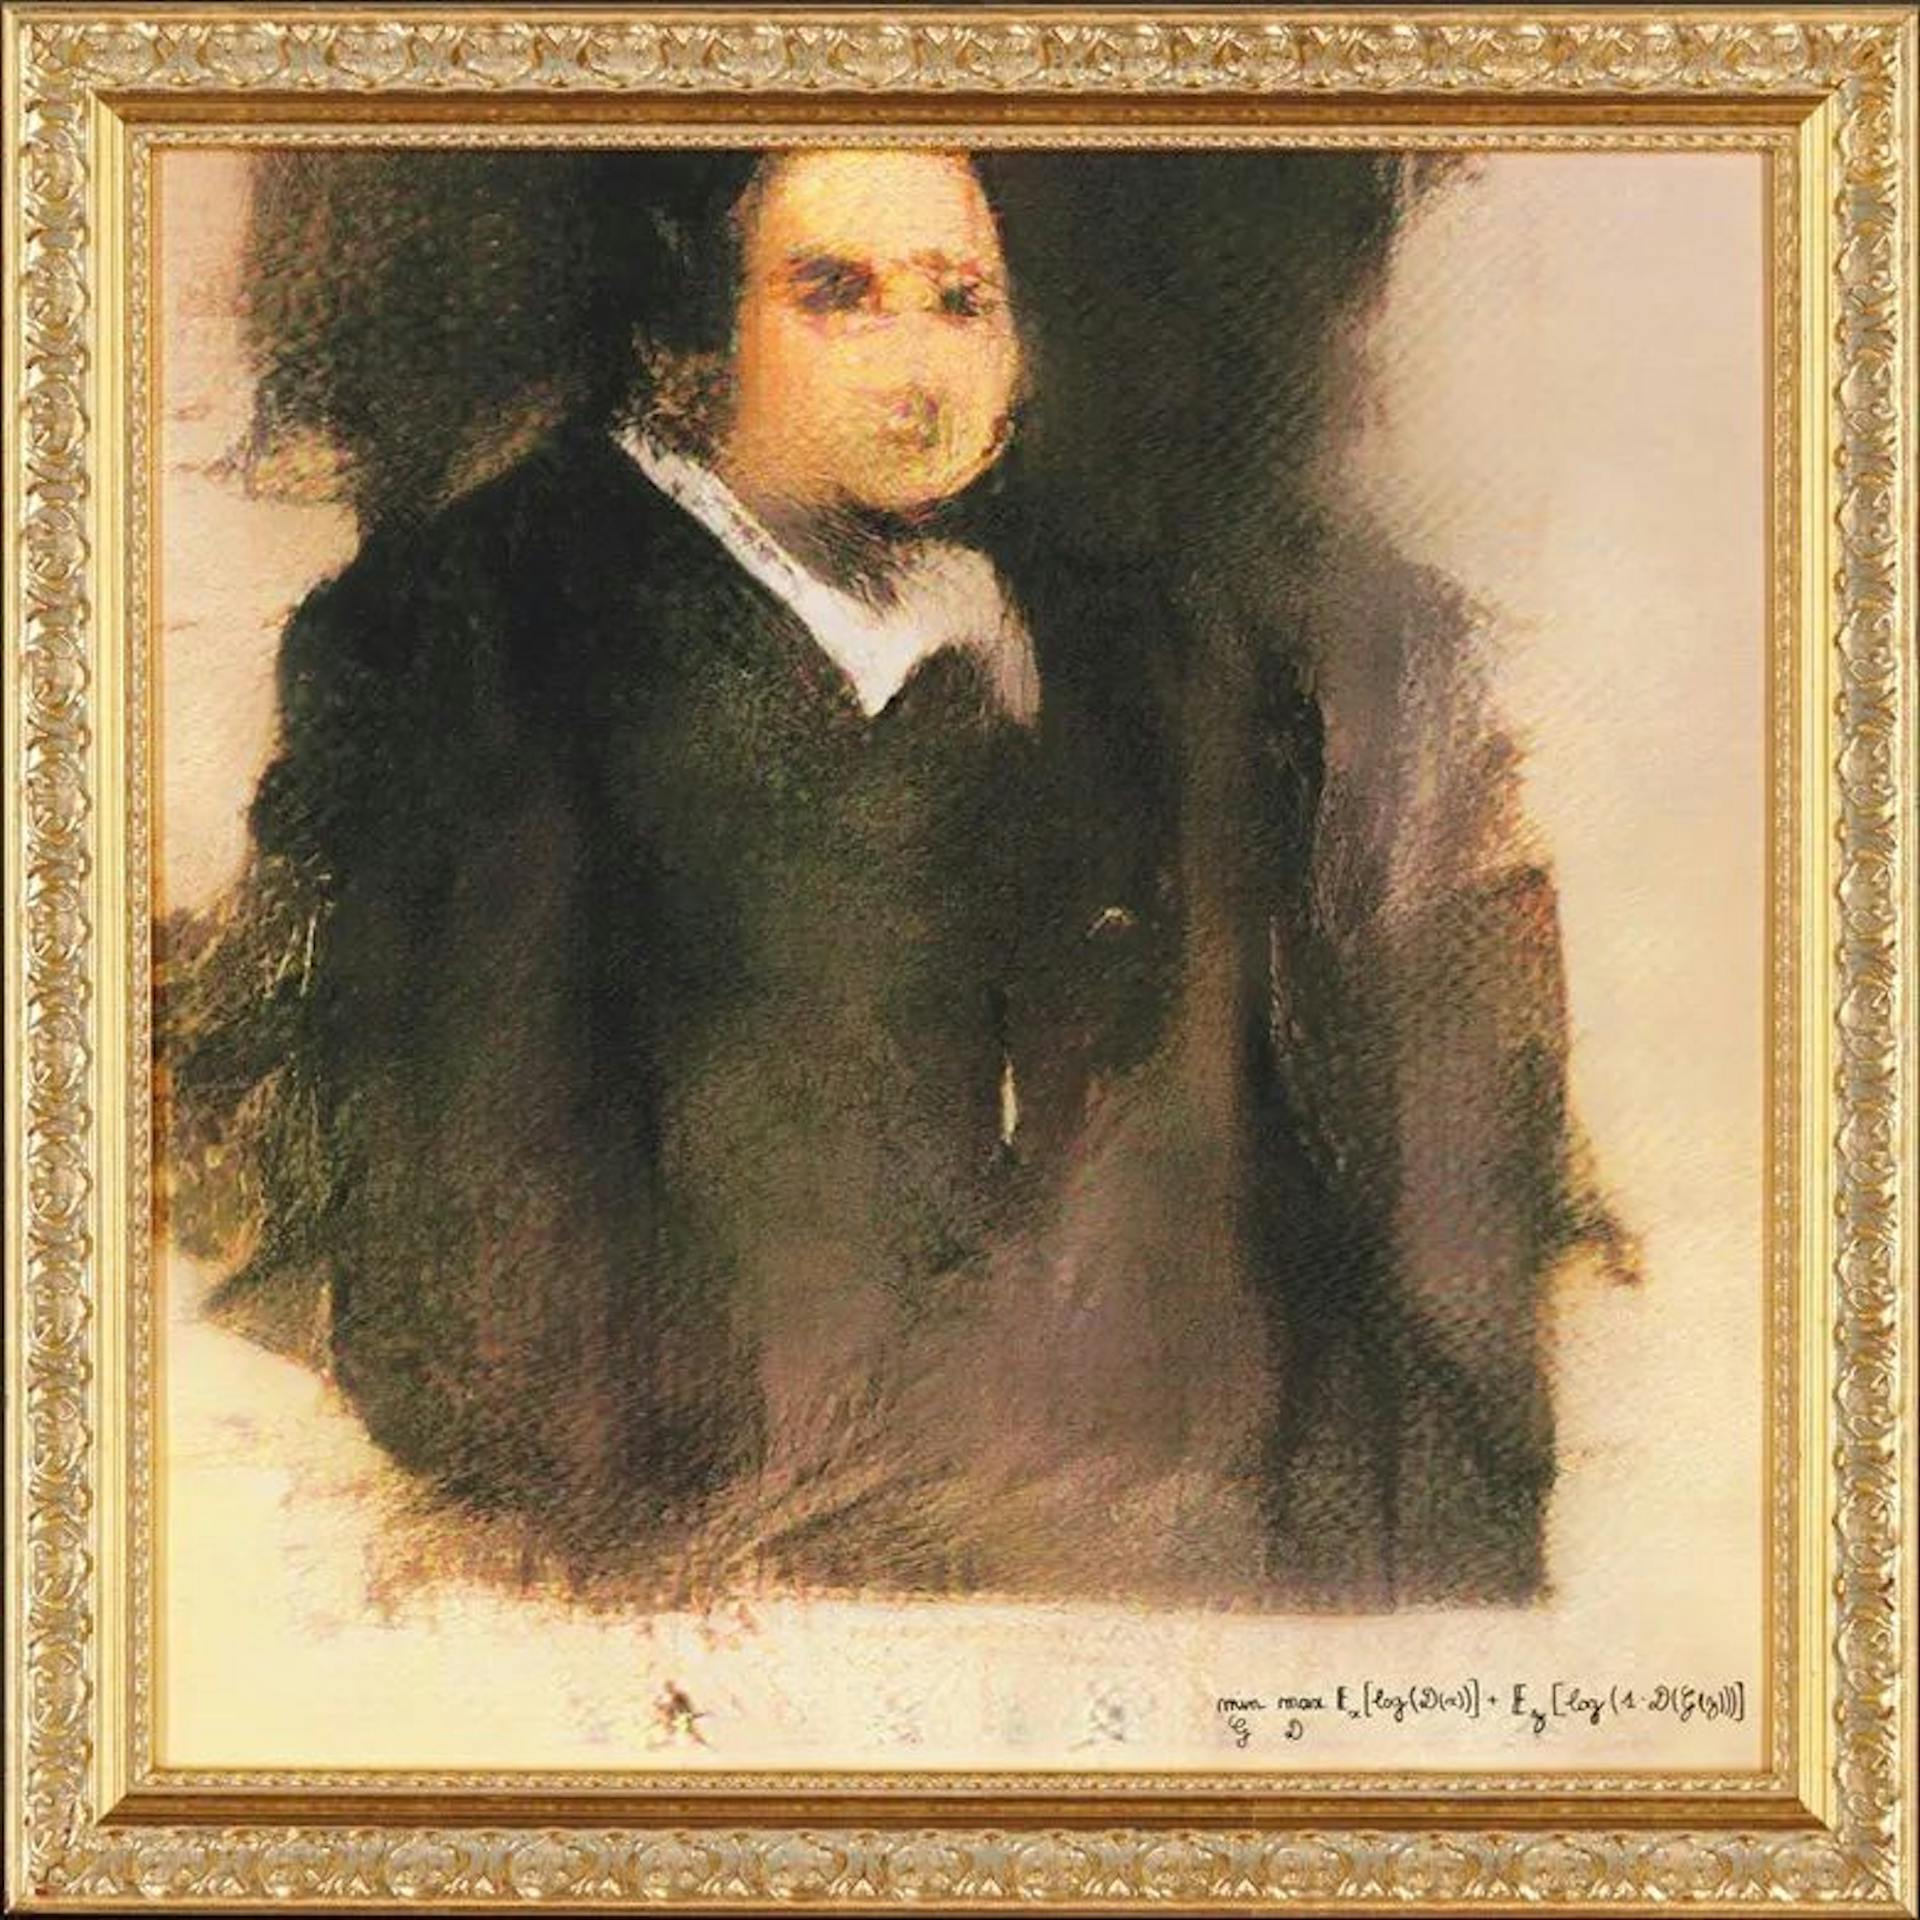 Portrait of Edmond de Belamy, the first AI portrait sold by Christie’s for $432,500. Who gets the credit? Man or machine?